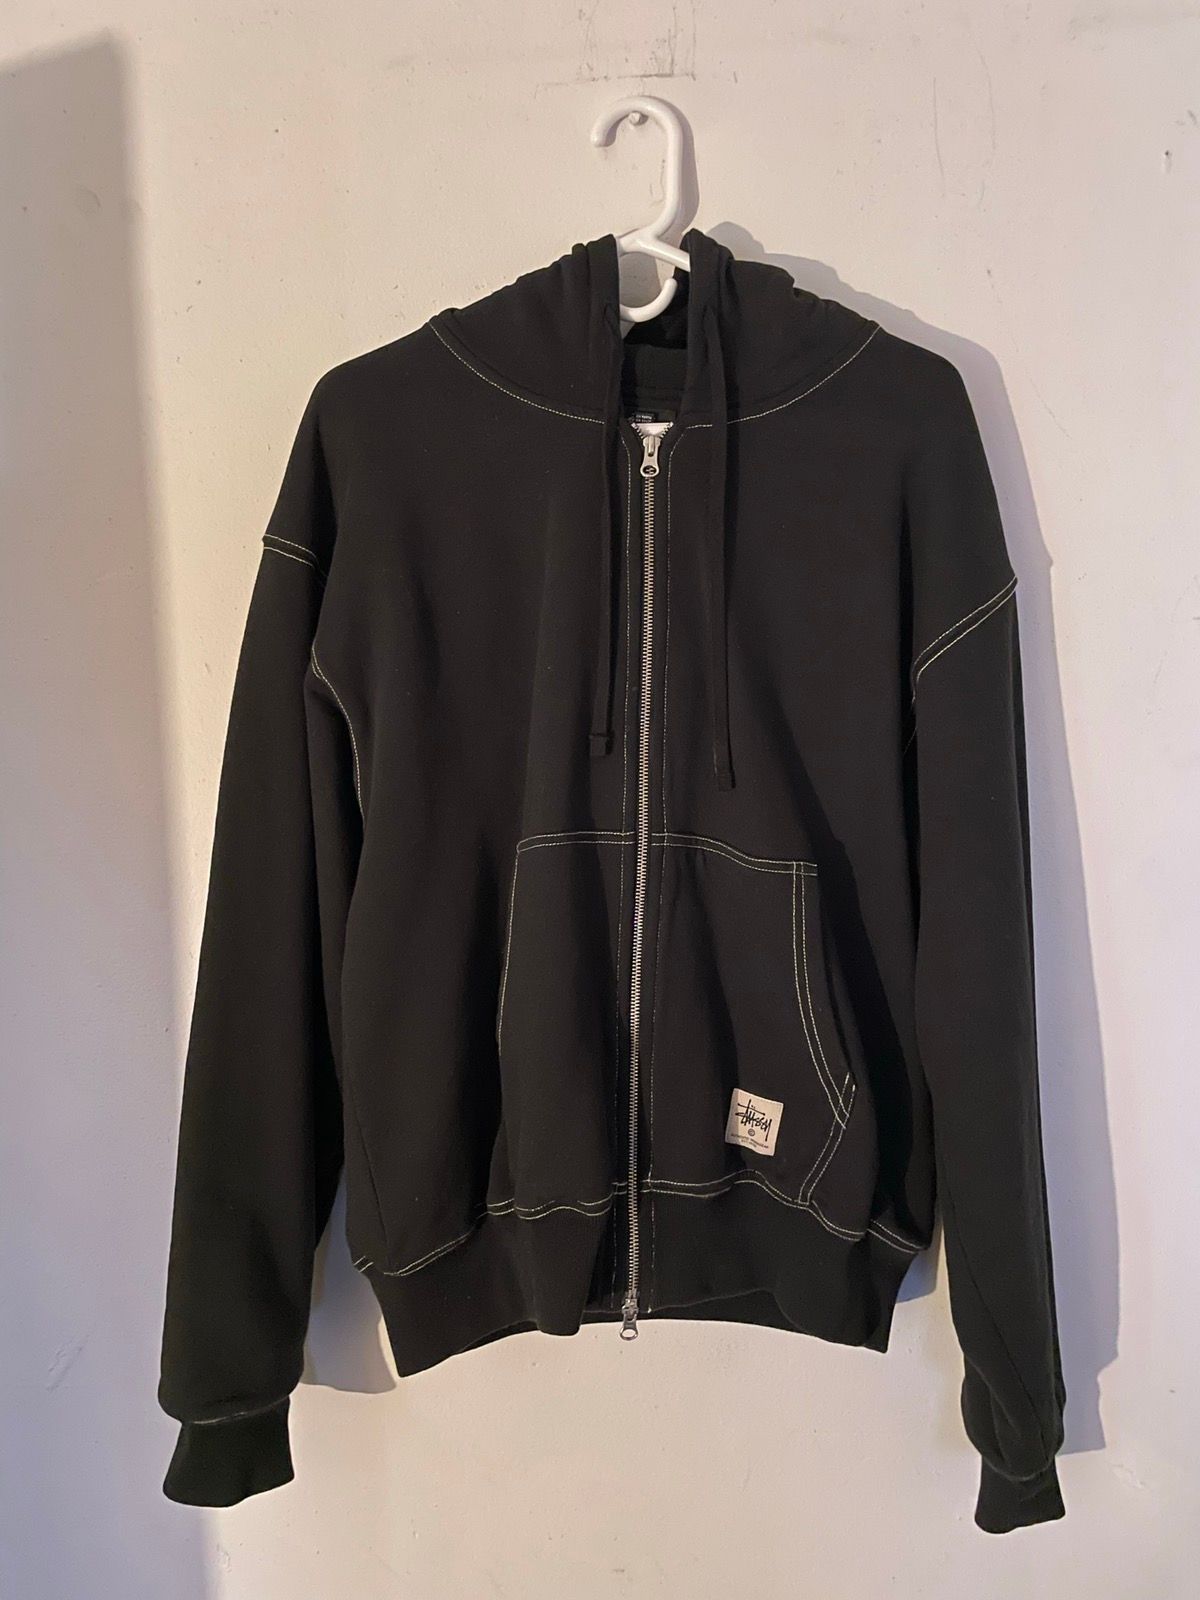 Stussy Double face label zip hoodie | Grailed